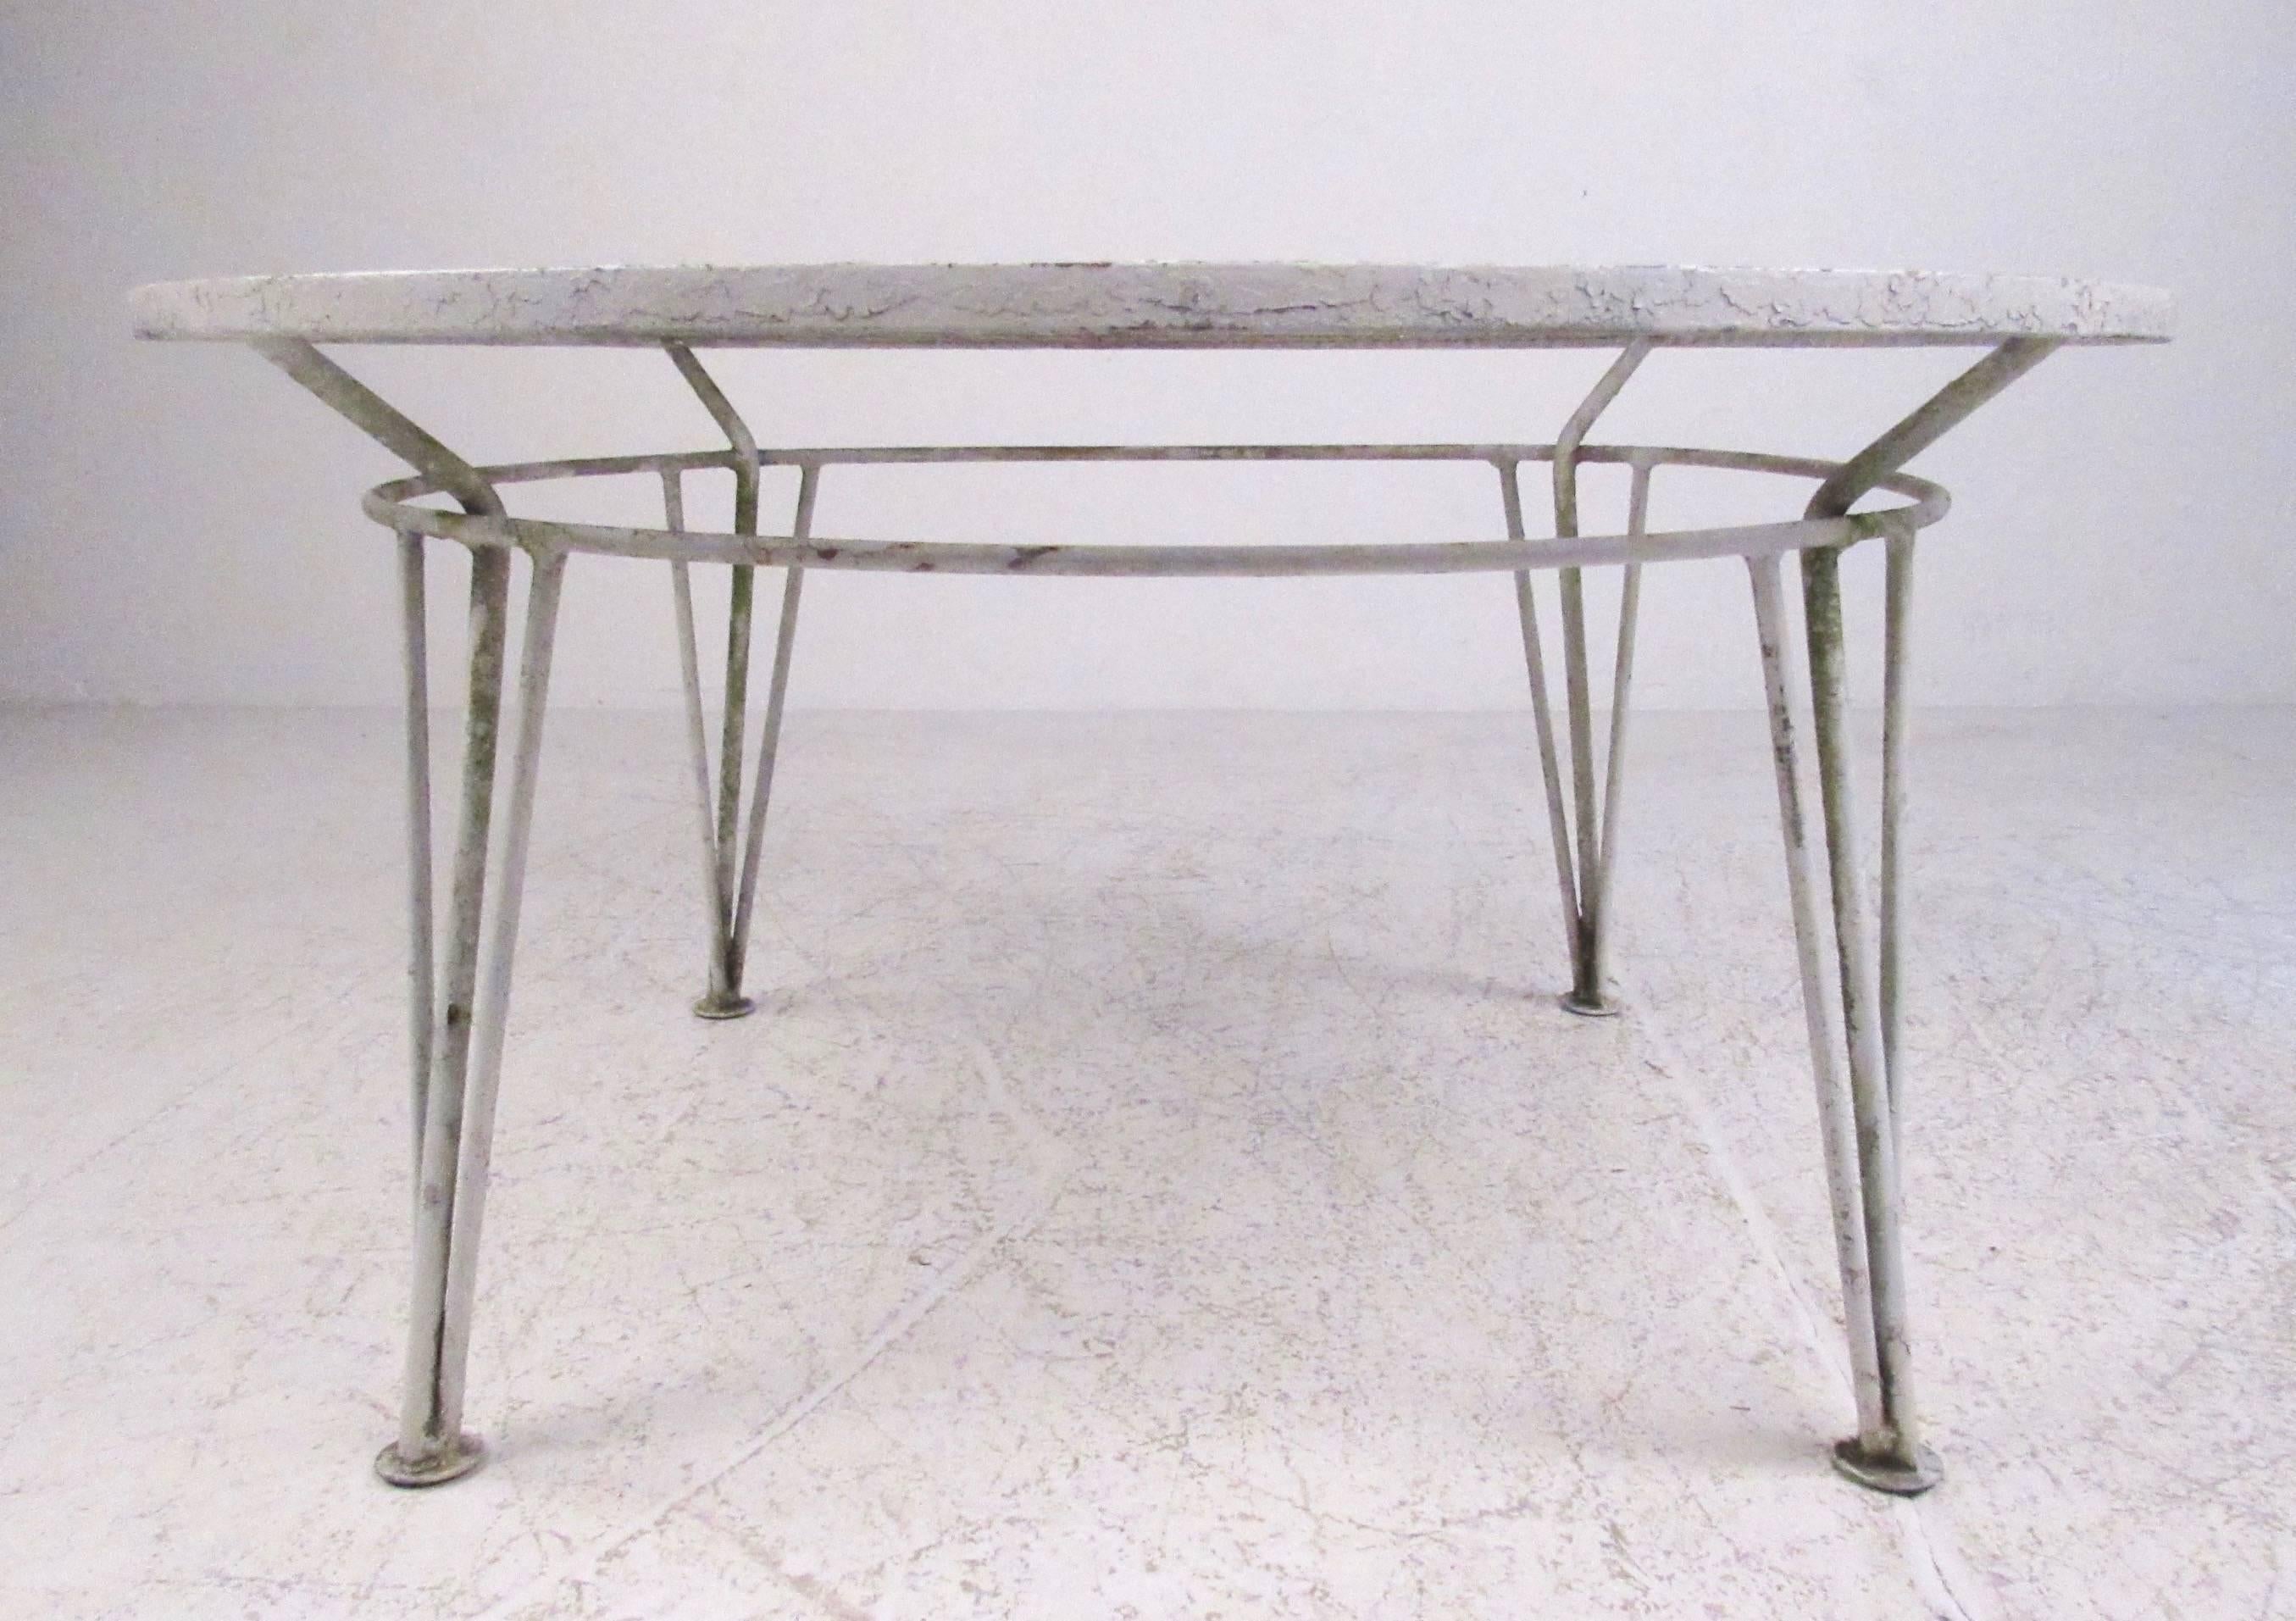 This unique mid-century modern cast iron coffee table features stylish hairpin legs, circular shape, and Salterini style design. This vintage table makes an impressive vintage addition to indoor or outdoor setting. Please confirm item location (NY